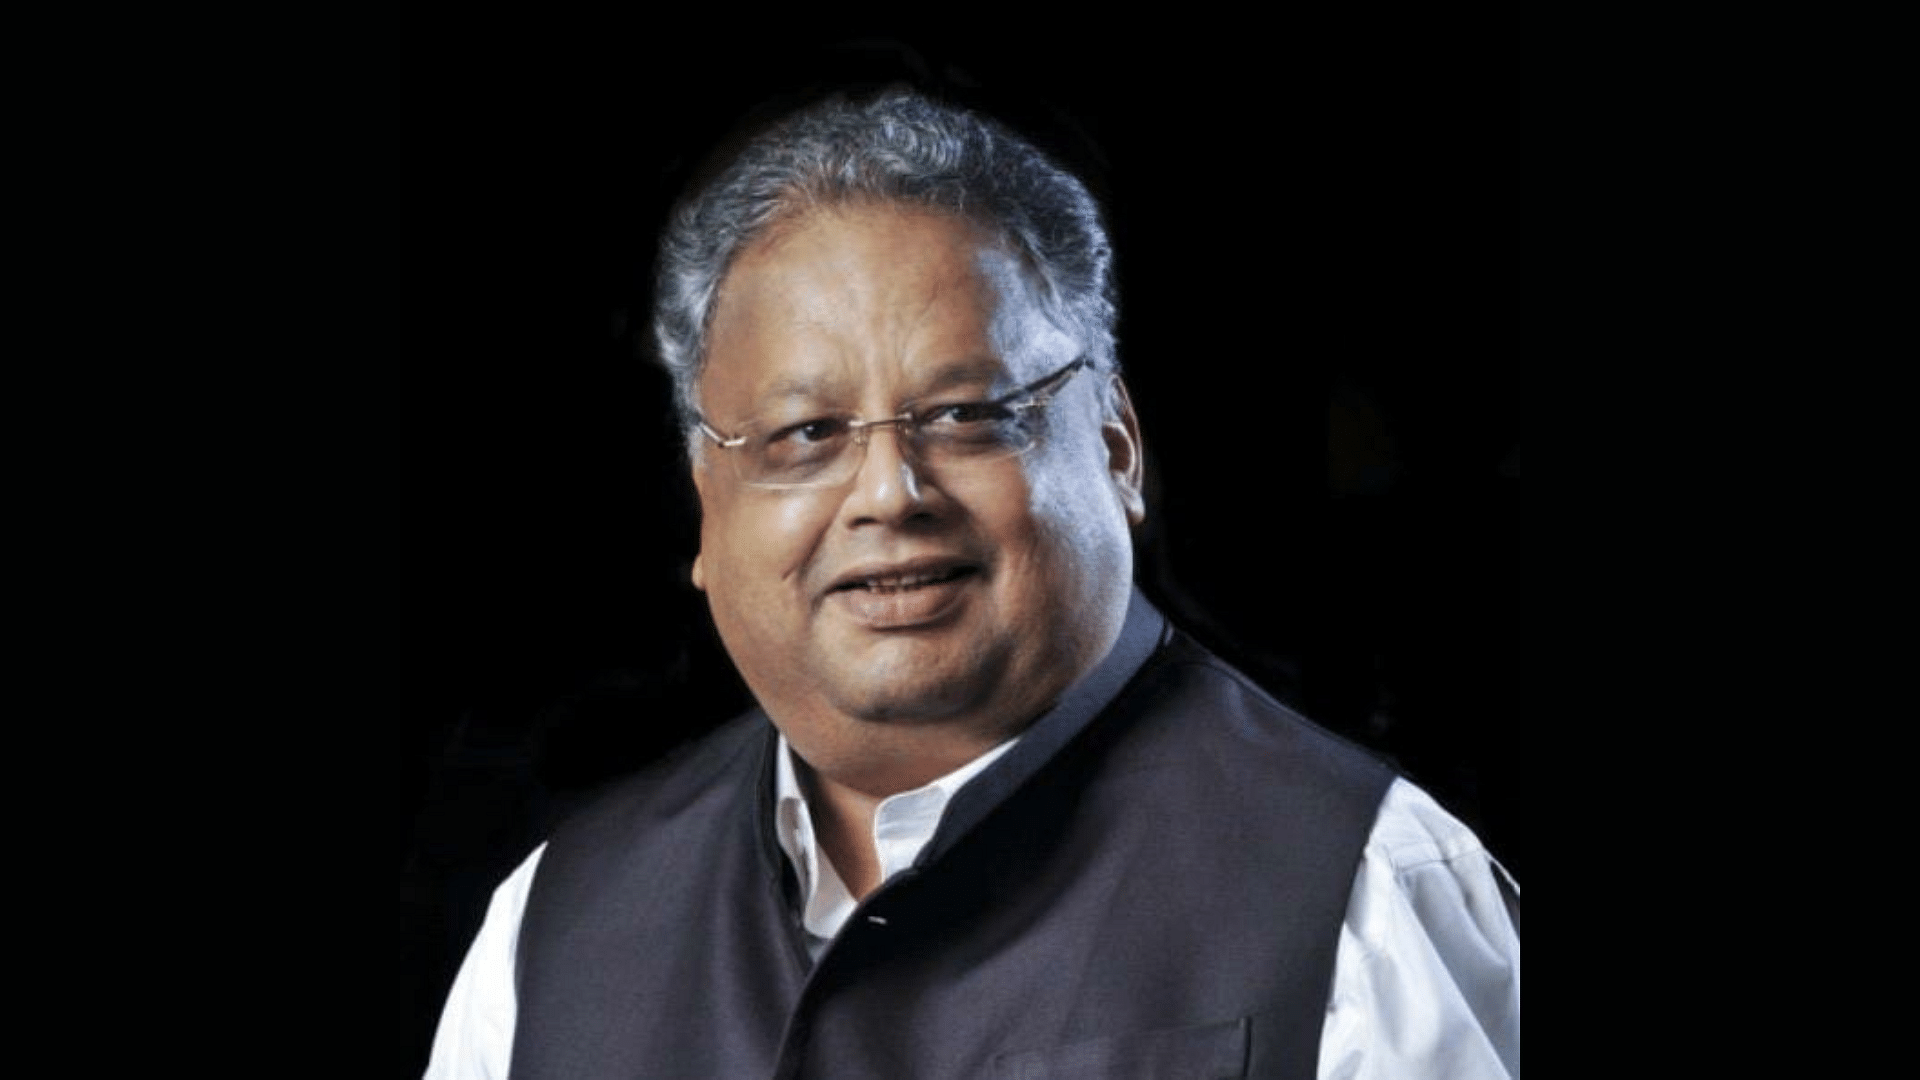 <div class="paragraphs"><p>Following ace investor <a href="https://www.thequint.com/topic/rakesh-jhunjhunwala">Rakesh Jhunjhunwala's</a> death at the age of 62 on Sunday, 14 August, Prime Minister <a href="https://www.thequint.com/topic/narendra-modi">Narendra Modi </a>took to Twitter and expressed his grief over Jhunjhunwala's demise.</p></div>